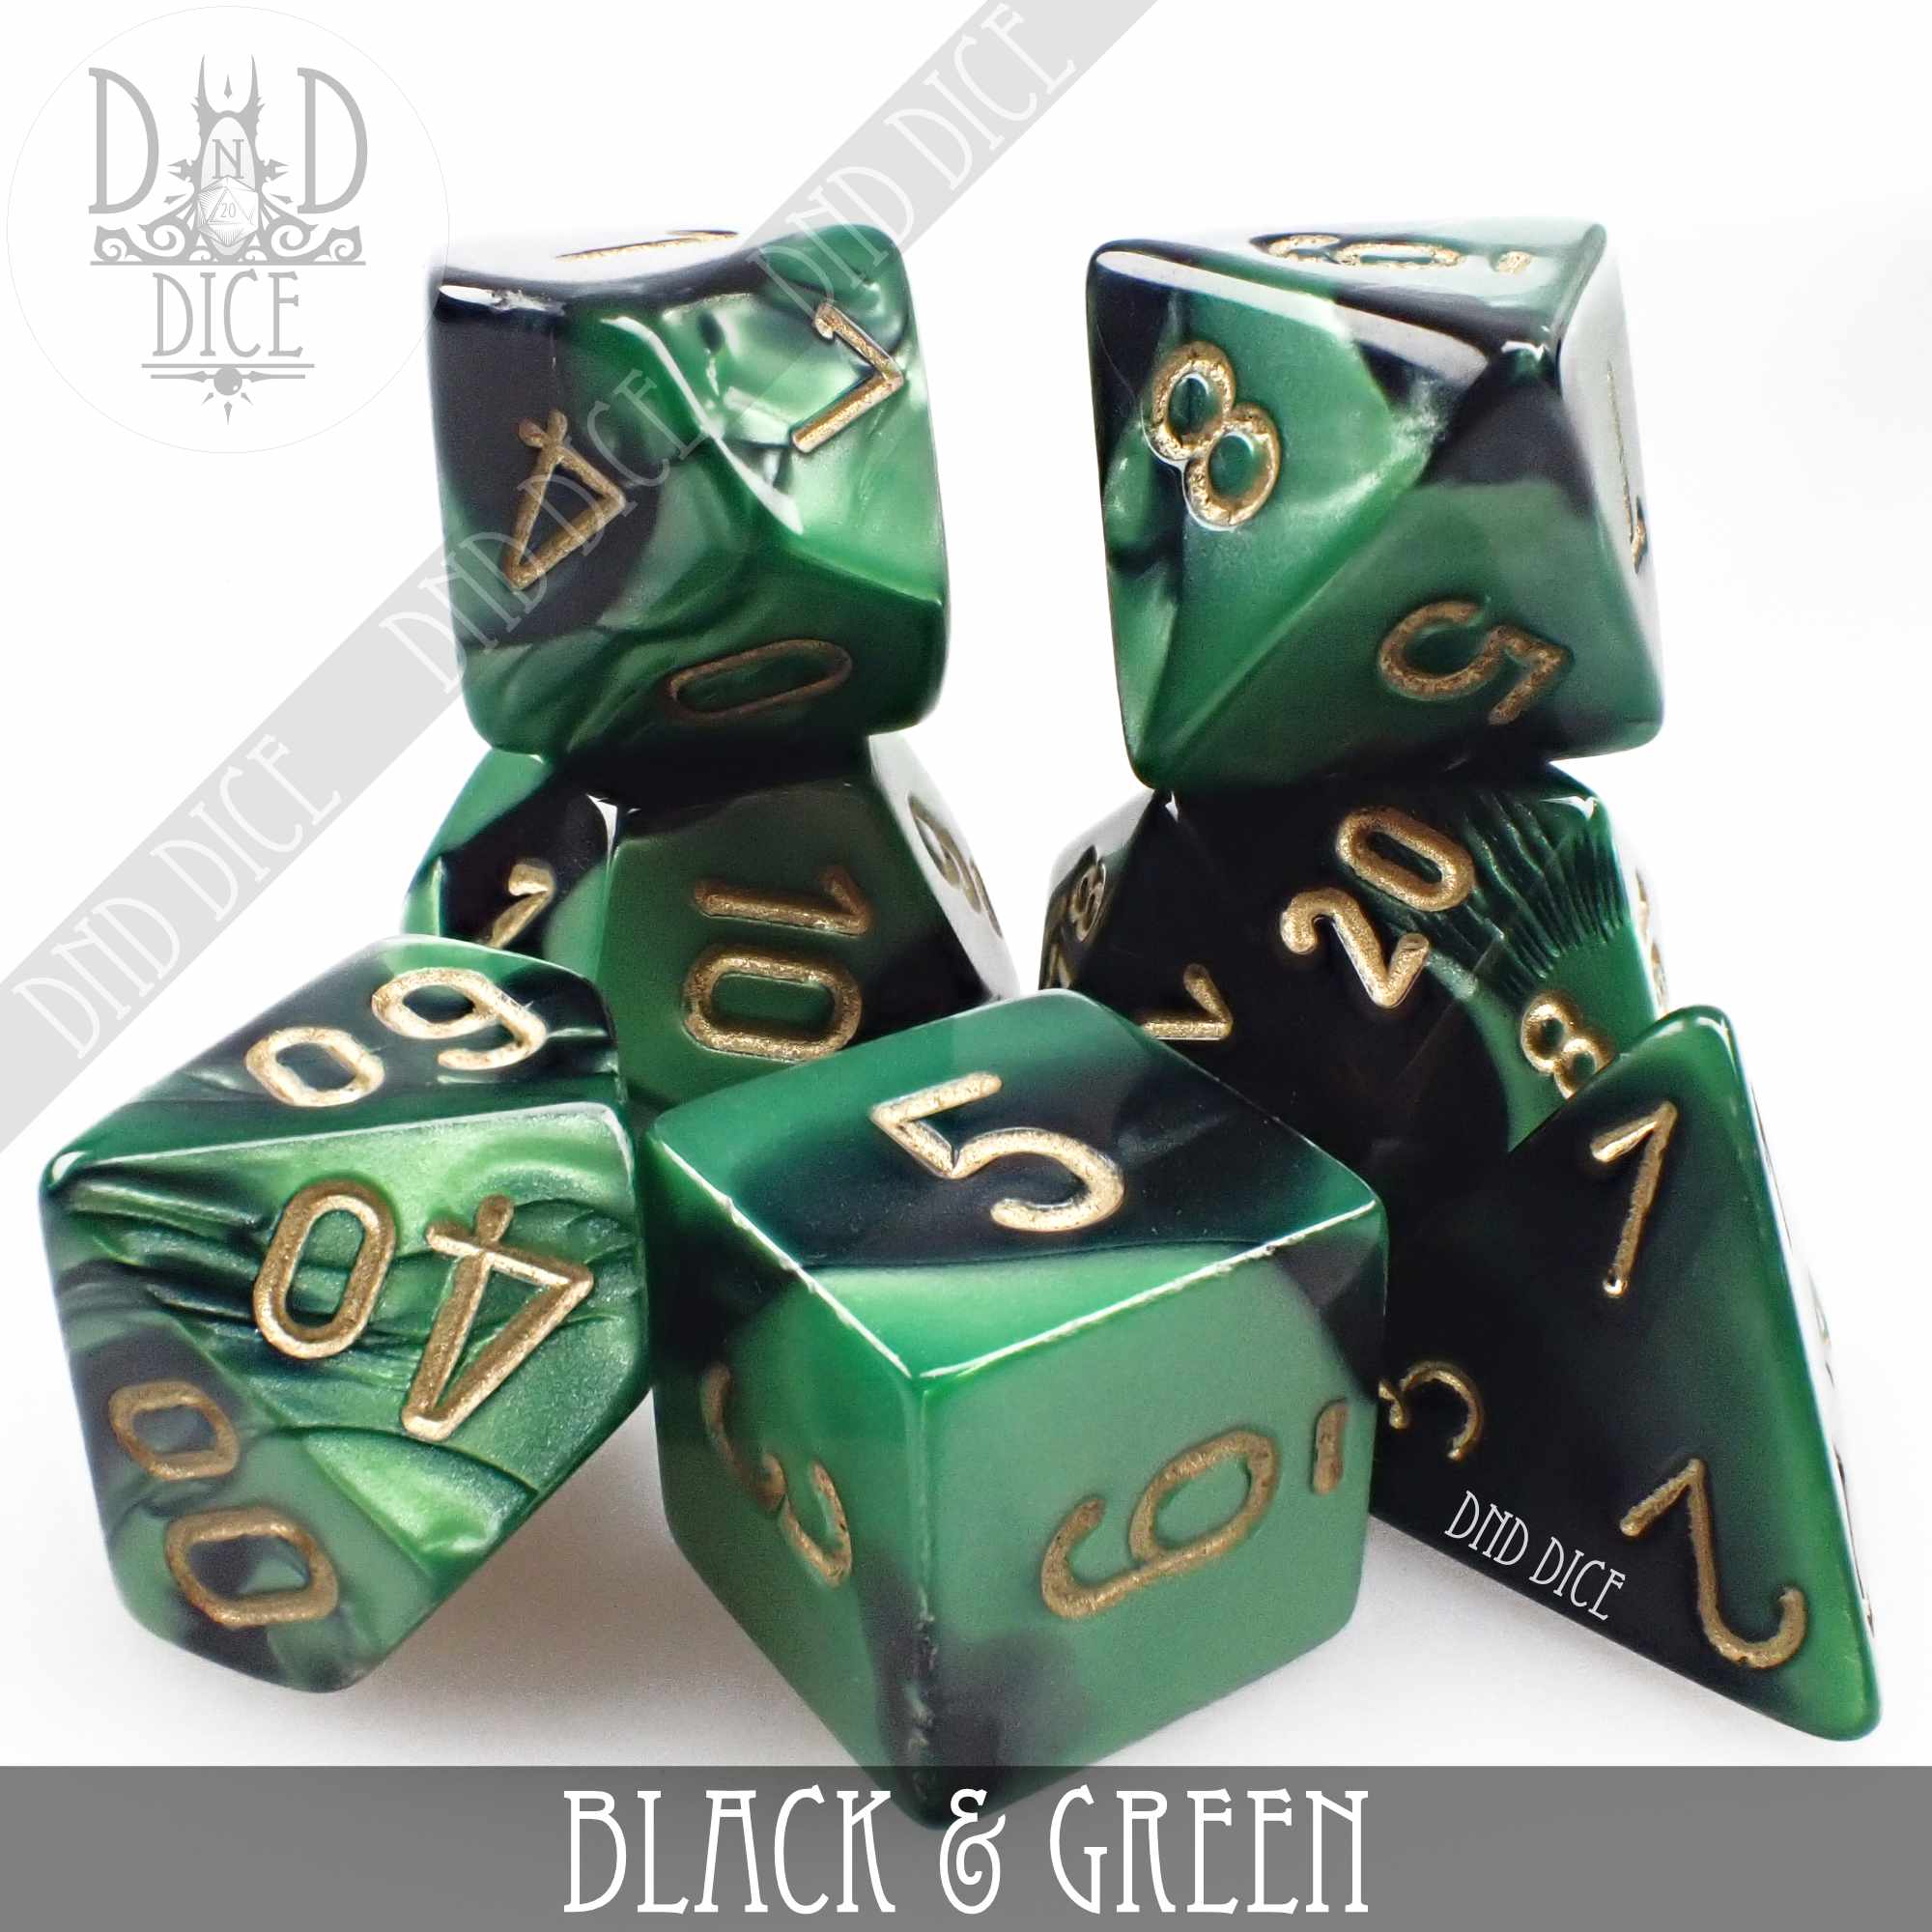 Black & Green Build Your Own Set